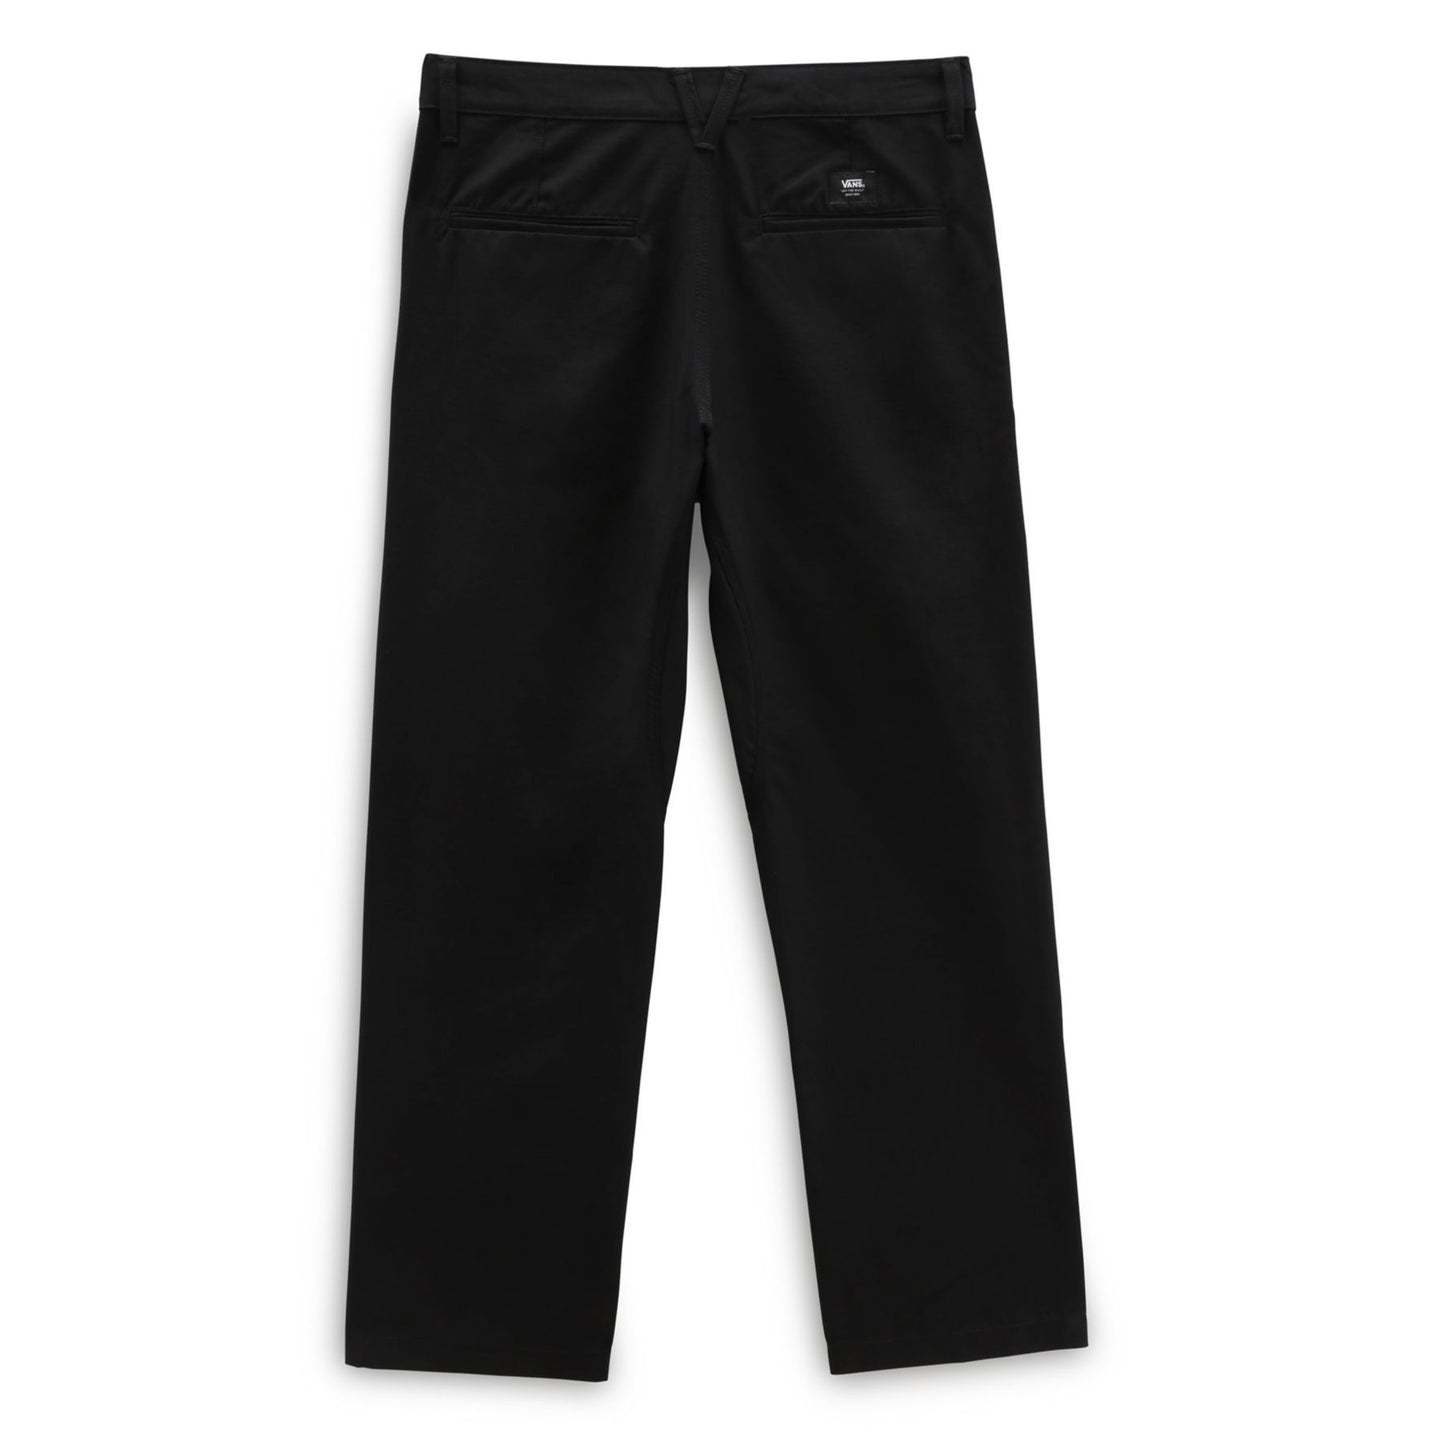 VANS AUTHENTIC CHINO RELAXED TAPERED PANT - BLACK